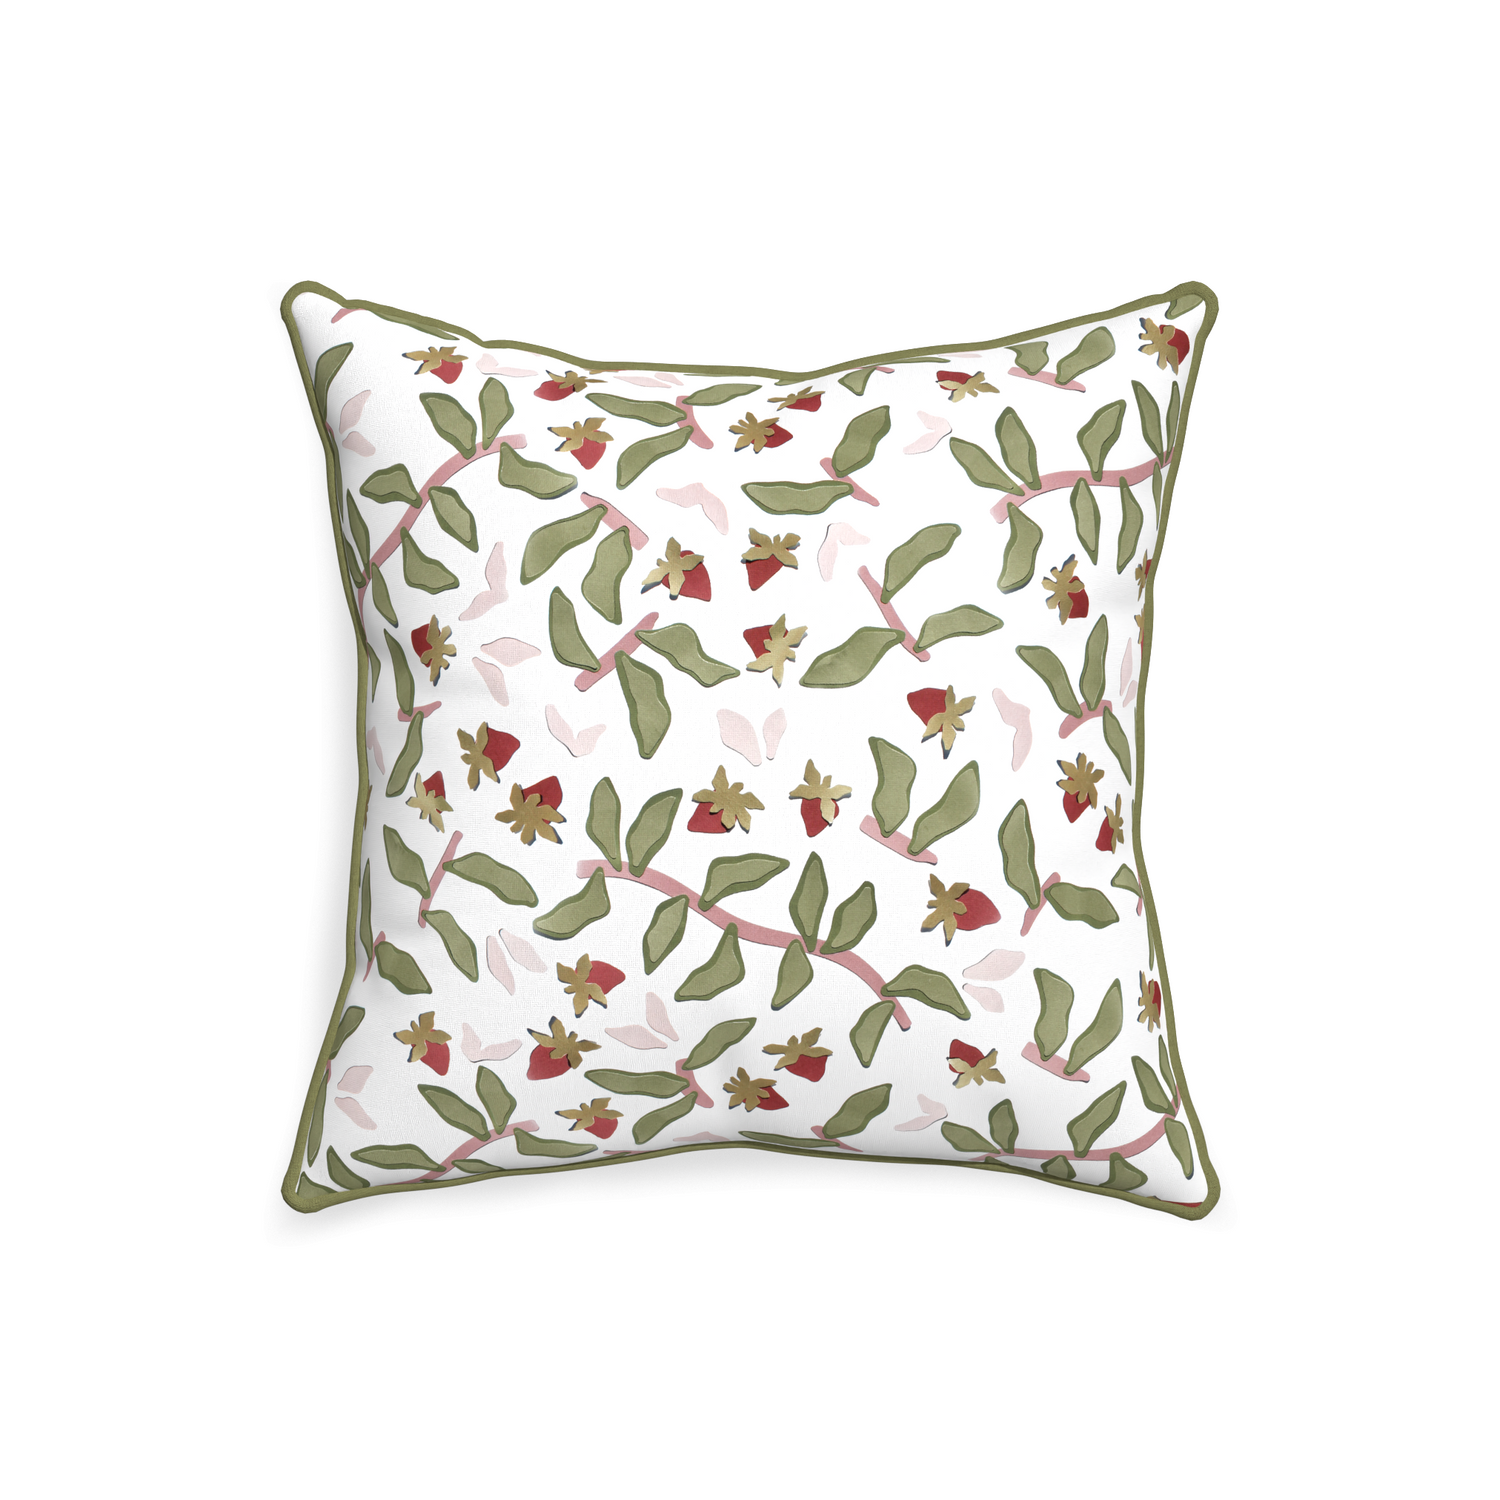 20-square nellie custom strawberry & botanicalpillow with moss piping on white background